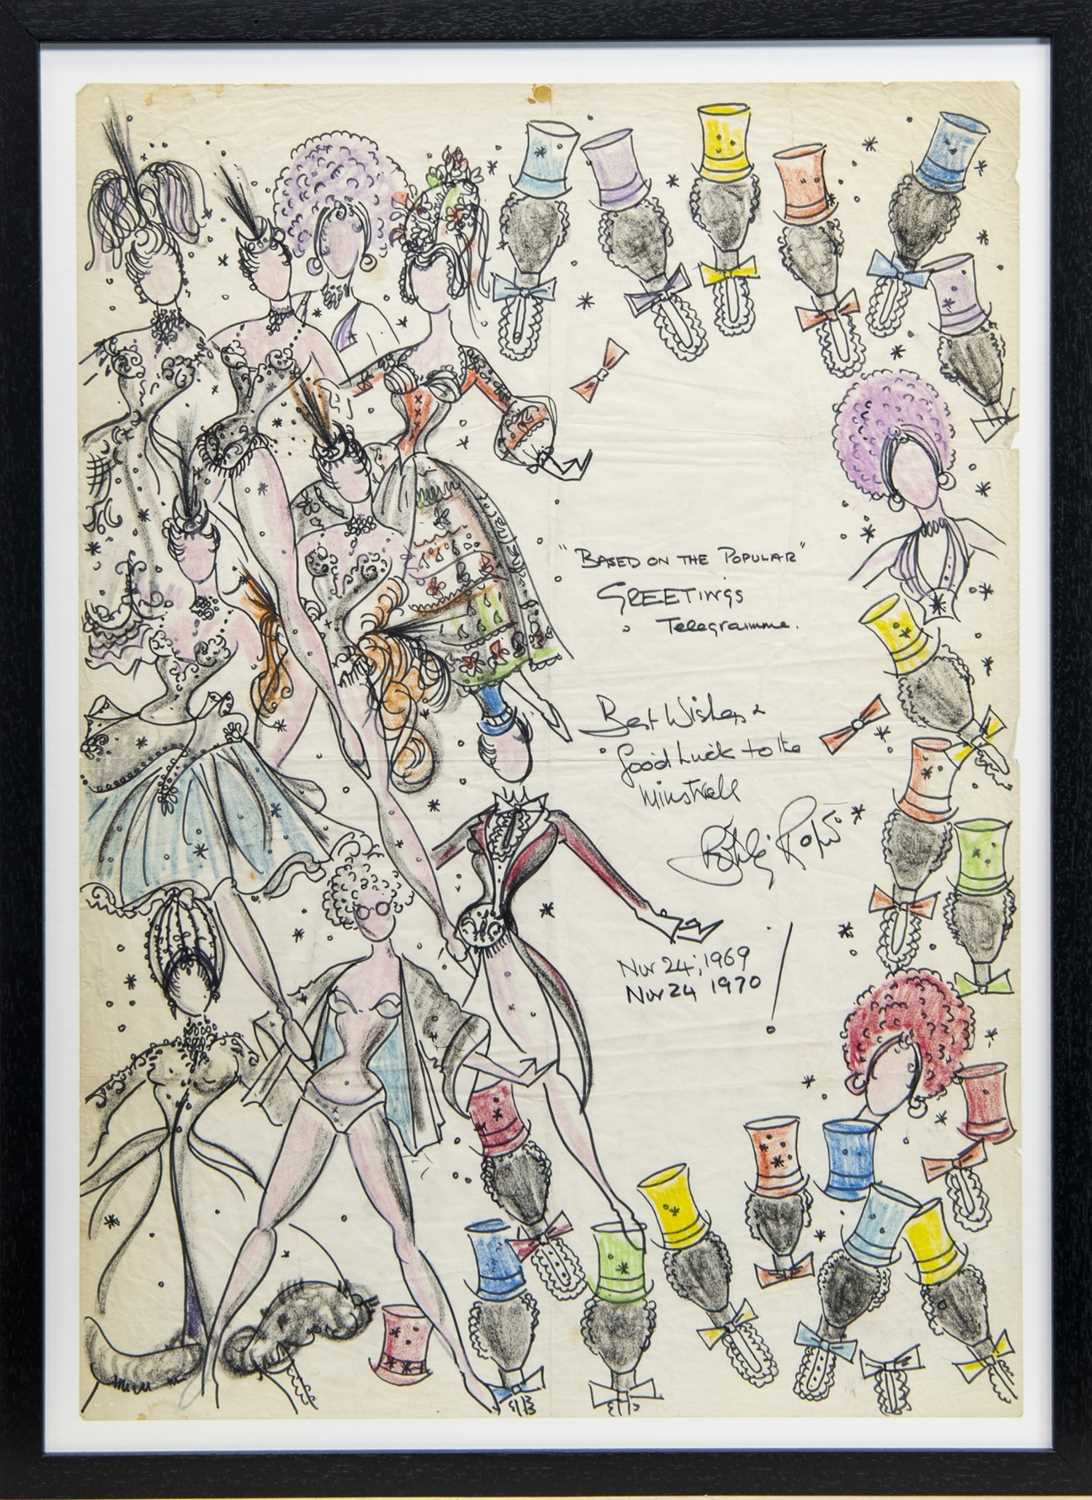 Lot 67 - COSTUME DESIGNS FOR THEATRE, A MIXED MEDIA BY ROBERT ST JOHN ROPER